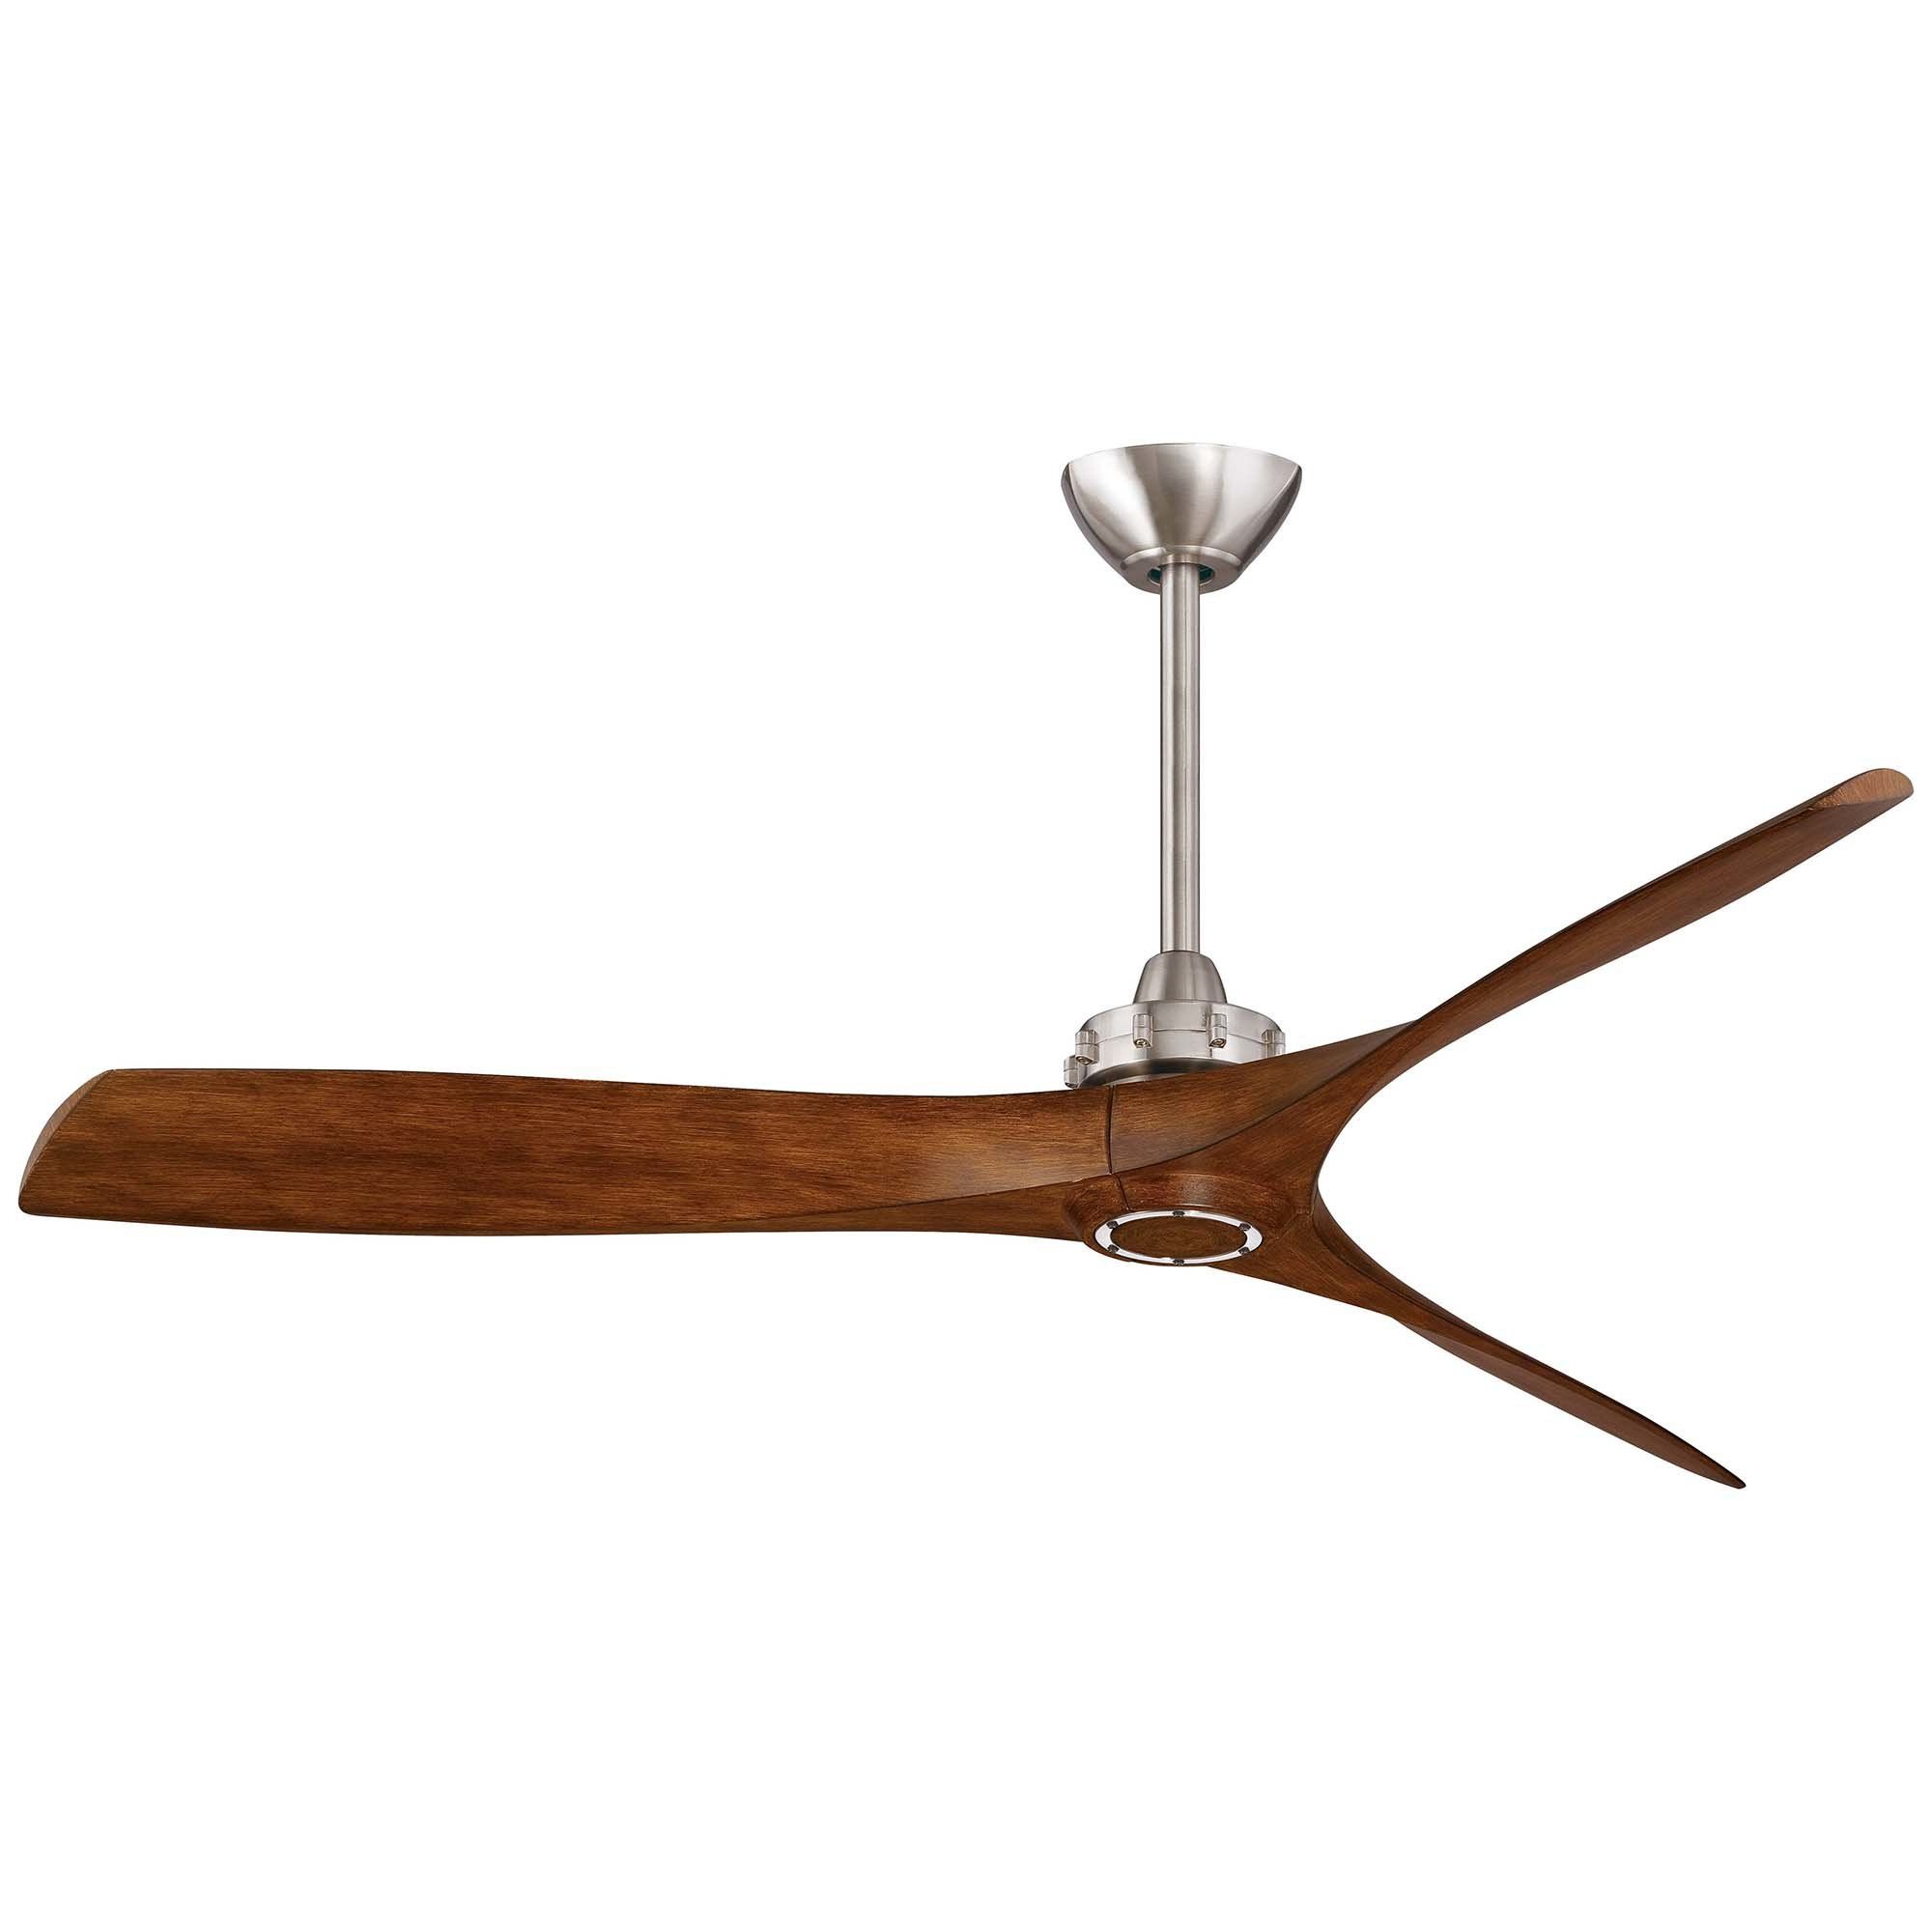 Well Liked Minka Aire 60 Aviation 3 Blade Ceiling Fan With Remote With Hedin 3 Blade Hugger Ceiling Fans (View 14 of 20)